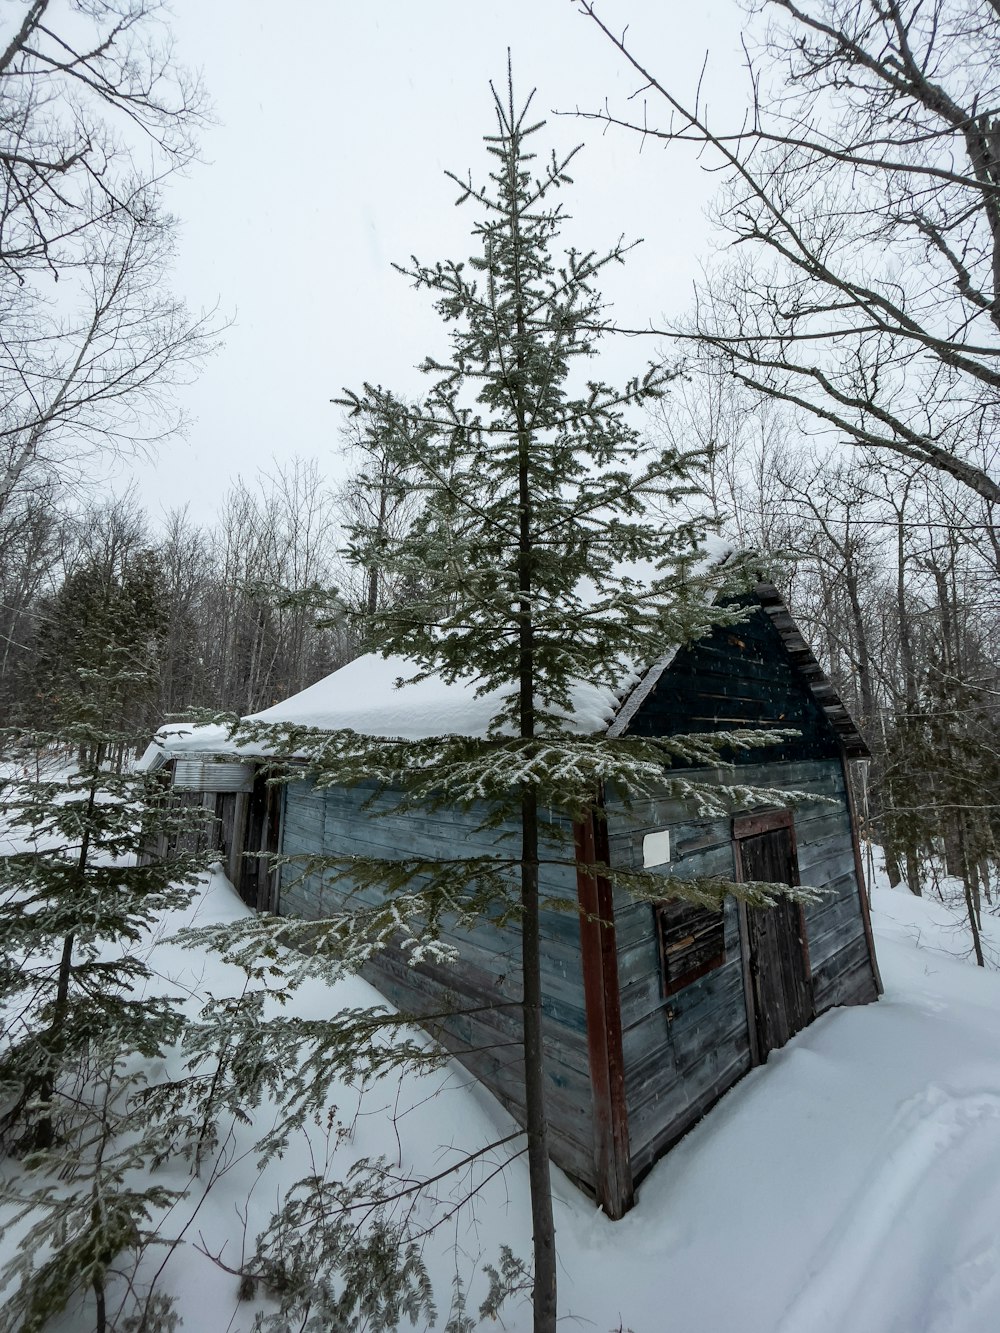 a small cabin in the middle of a snowy forest